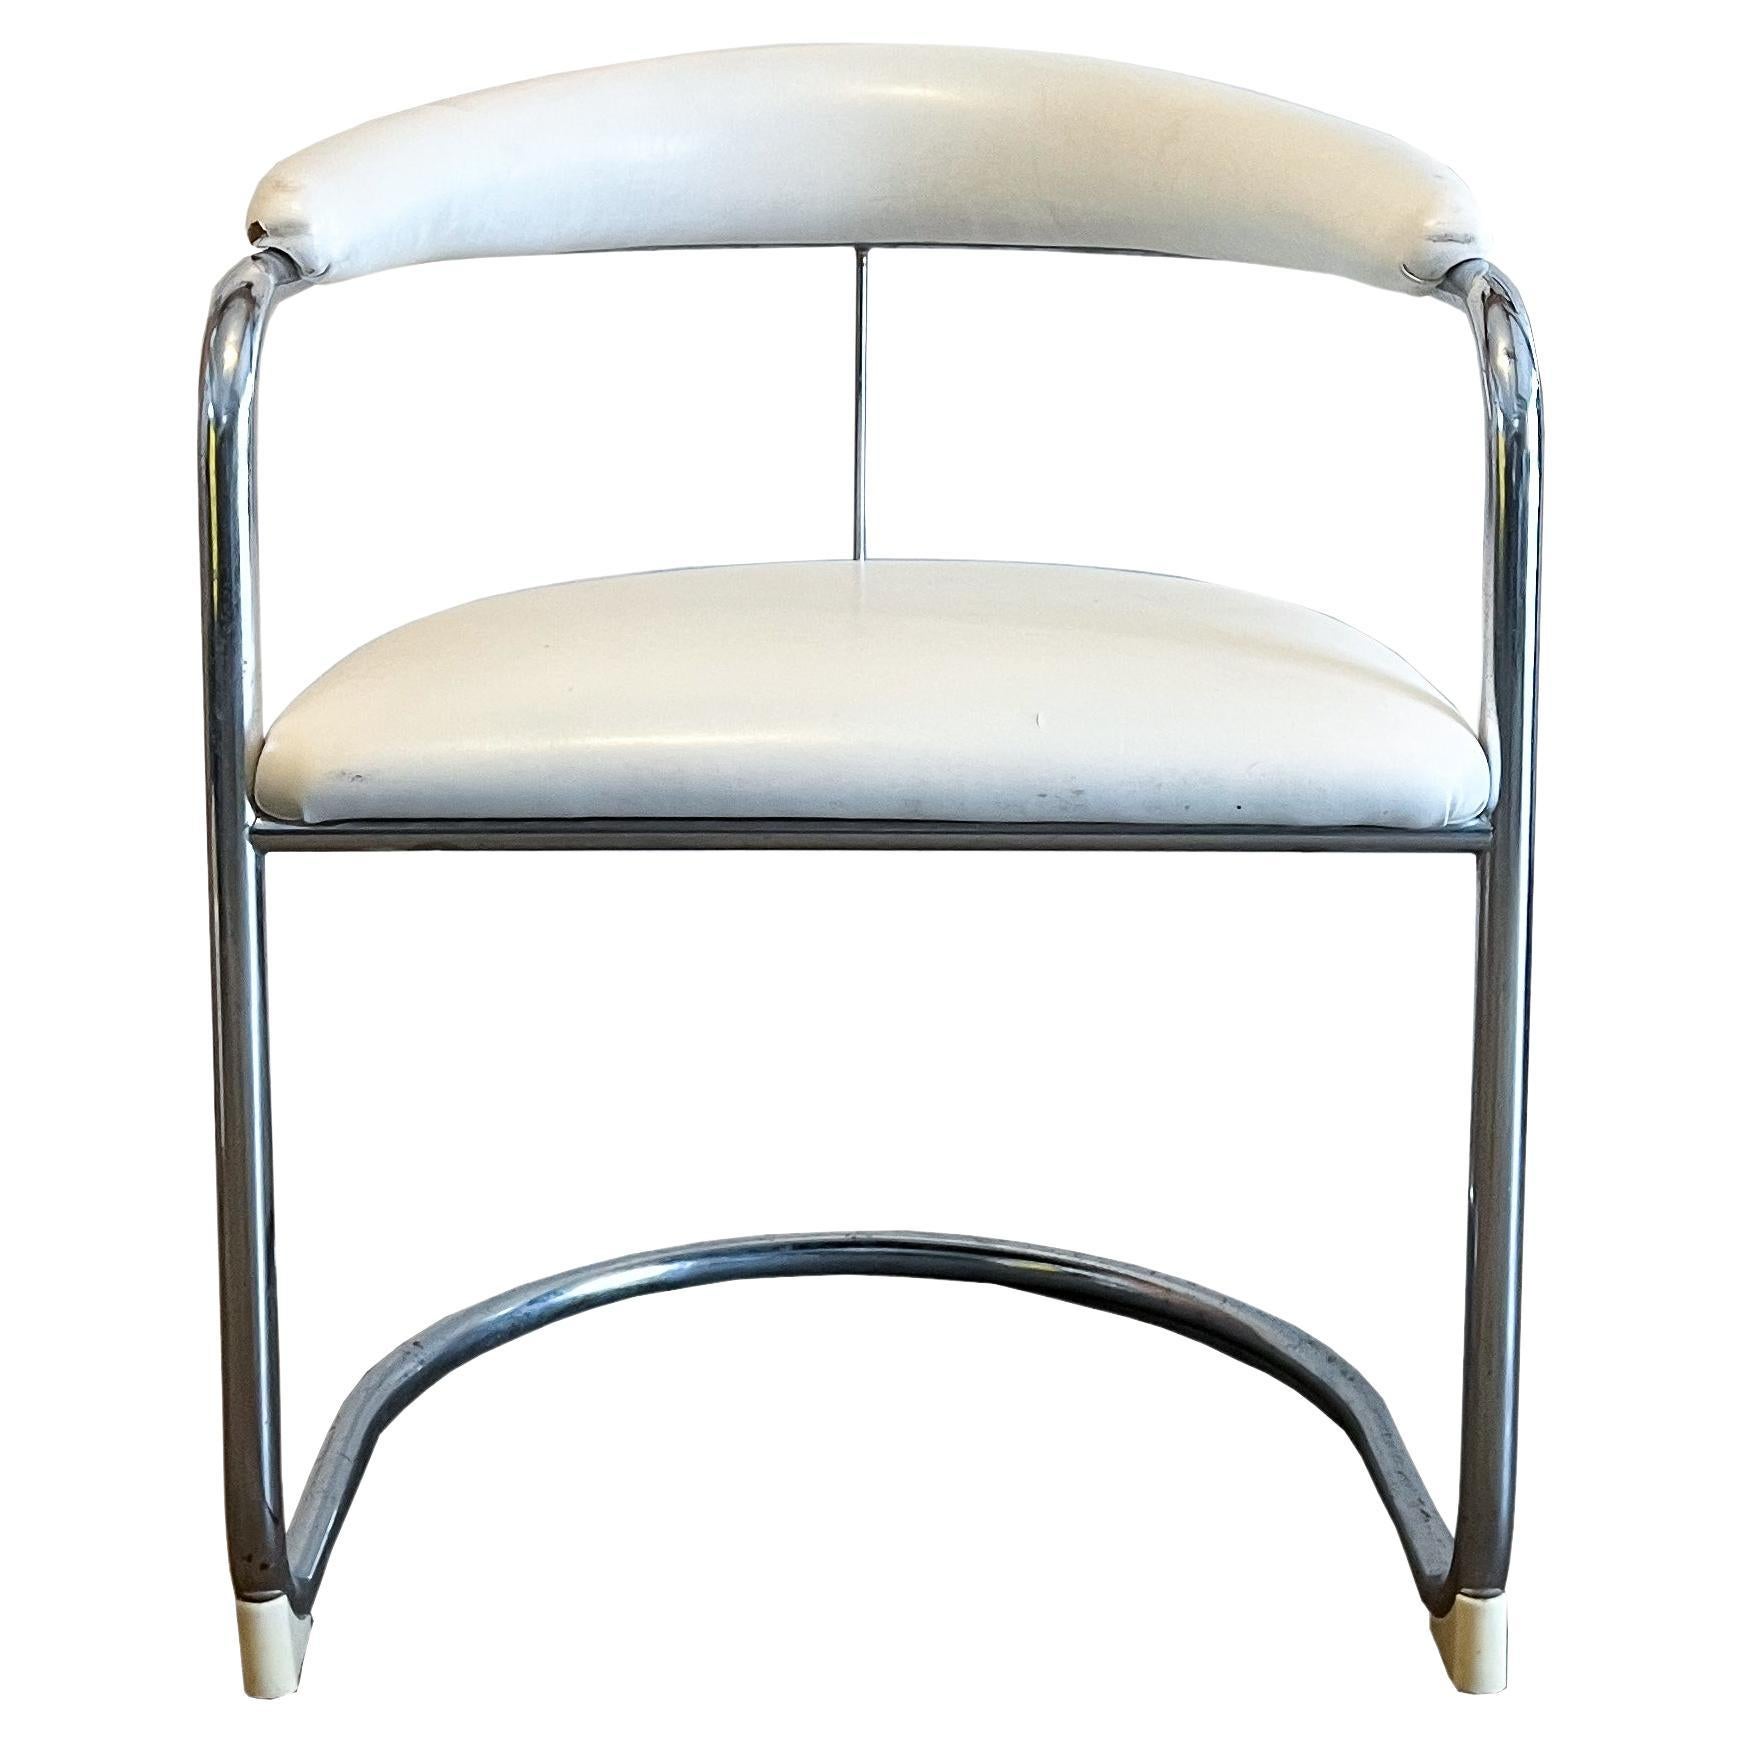 White Vinyl & Chrome Model SS33 Style Cantilever Chair For Sale